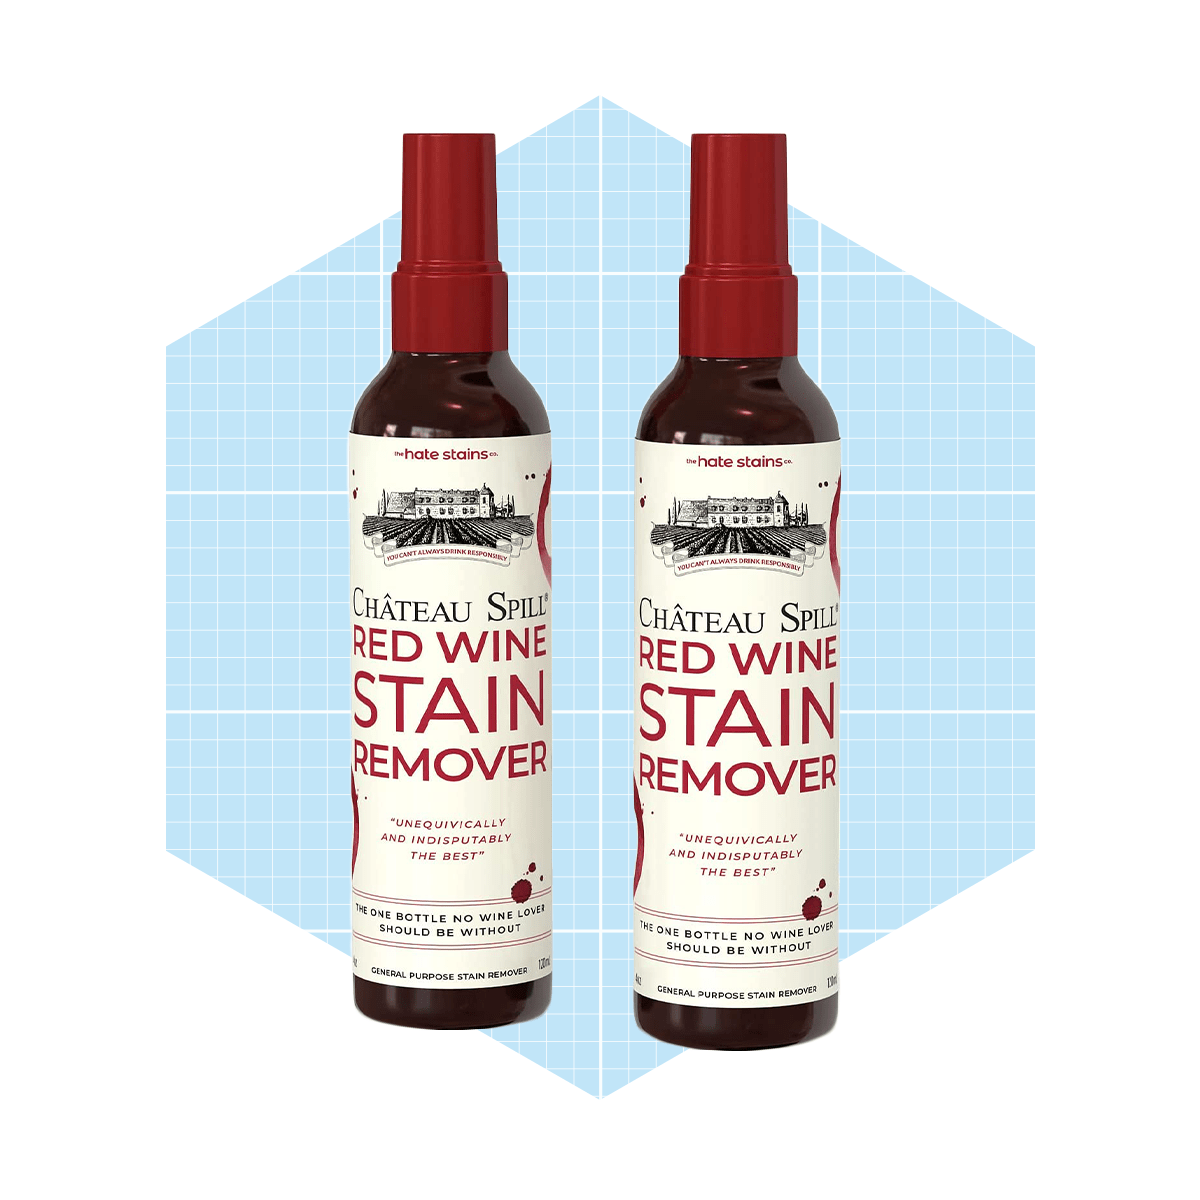 Chateau Spill Red Wine Stain Remover Ecomm Via Amazon.com